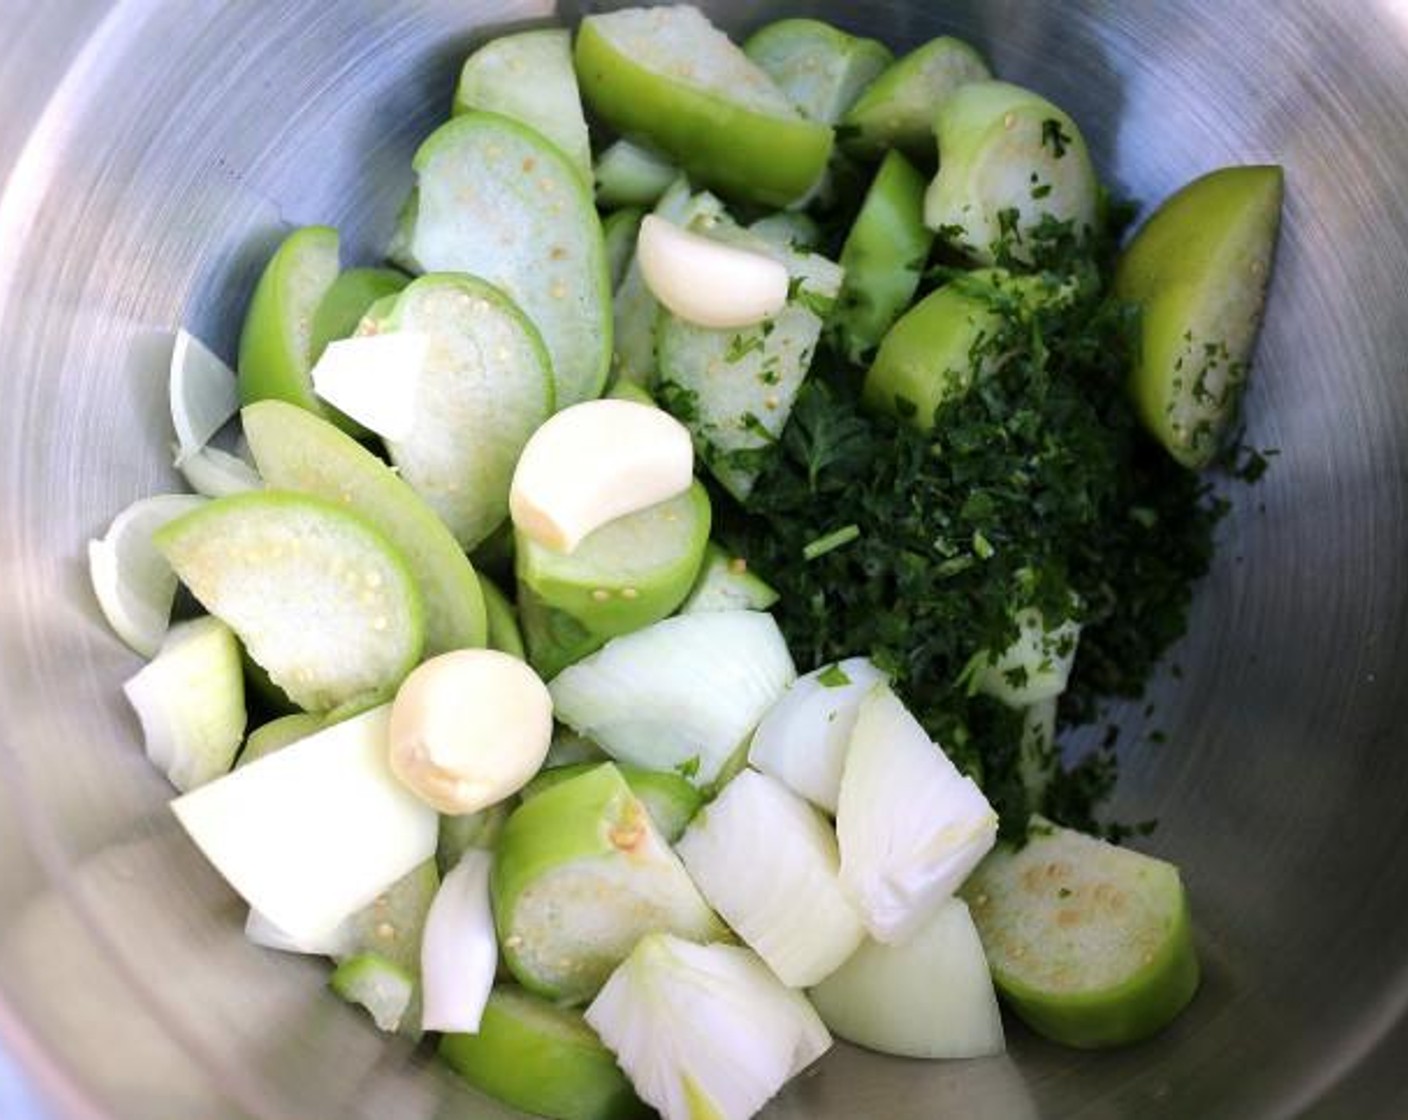 step 1 To the diced Tomatillo (1 lb), add Onion (1), Garlic (4 cloves), Fresh Cilantro (1/4 cup), Jalapeño Pepper (1 Tbsp), and Kosher Salt (to taste). Blend the mixture until smooth.